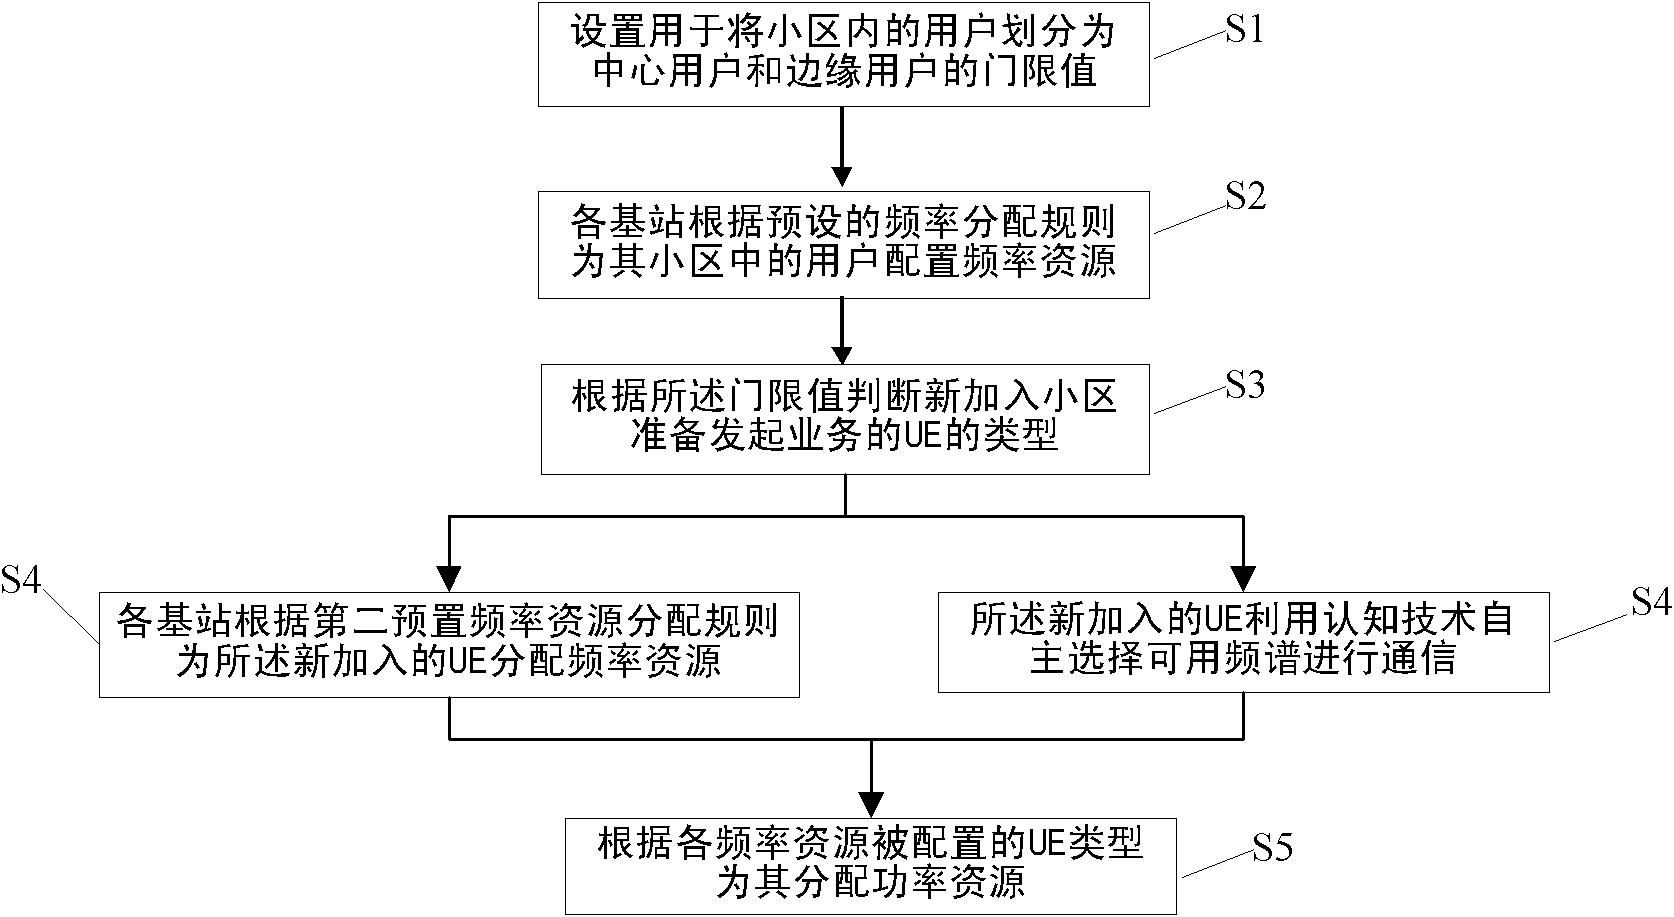 Method for reducing long term evolution (LTE) radio communication system cell interference by using cognitive technology